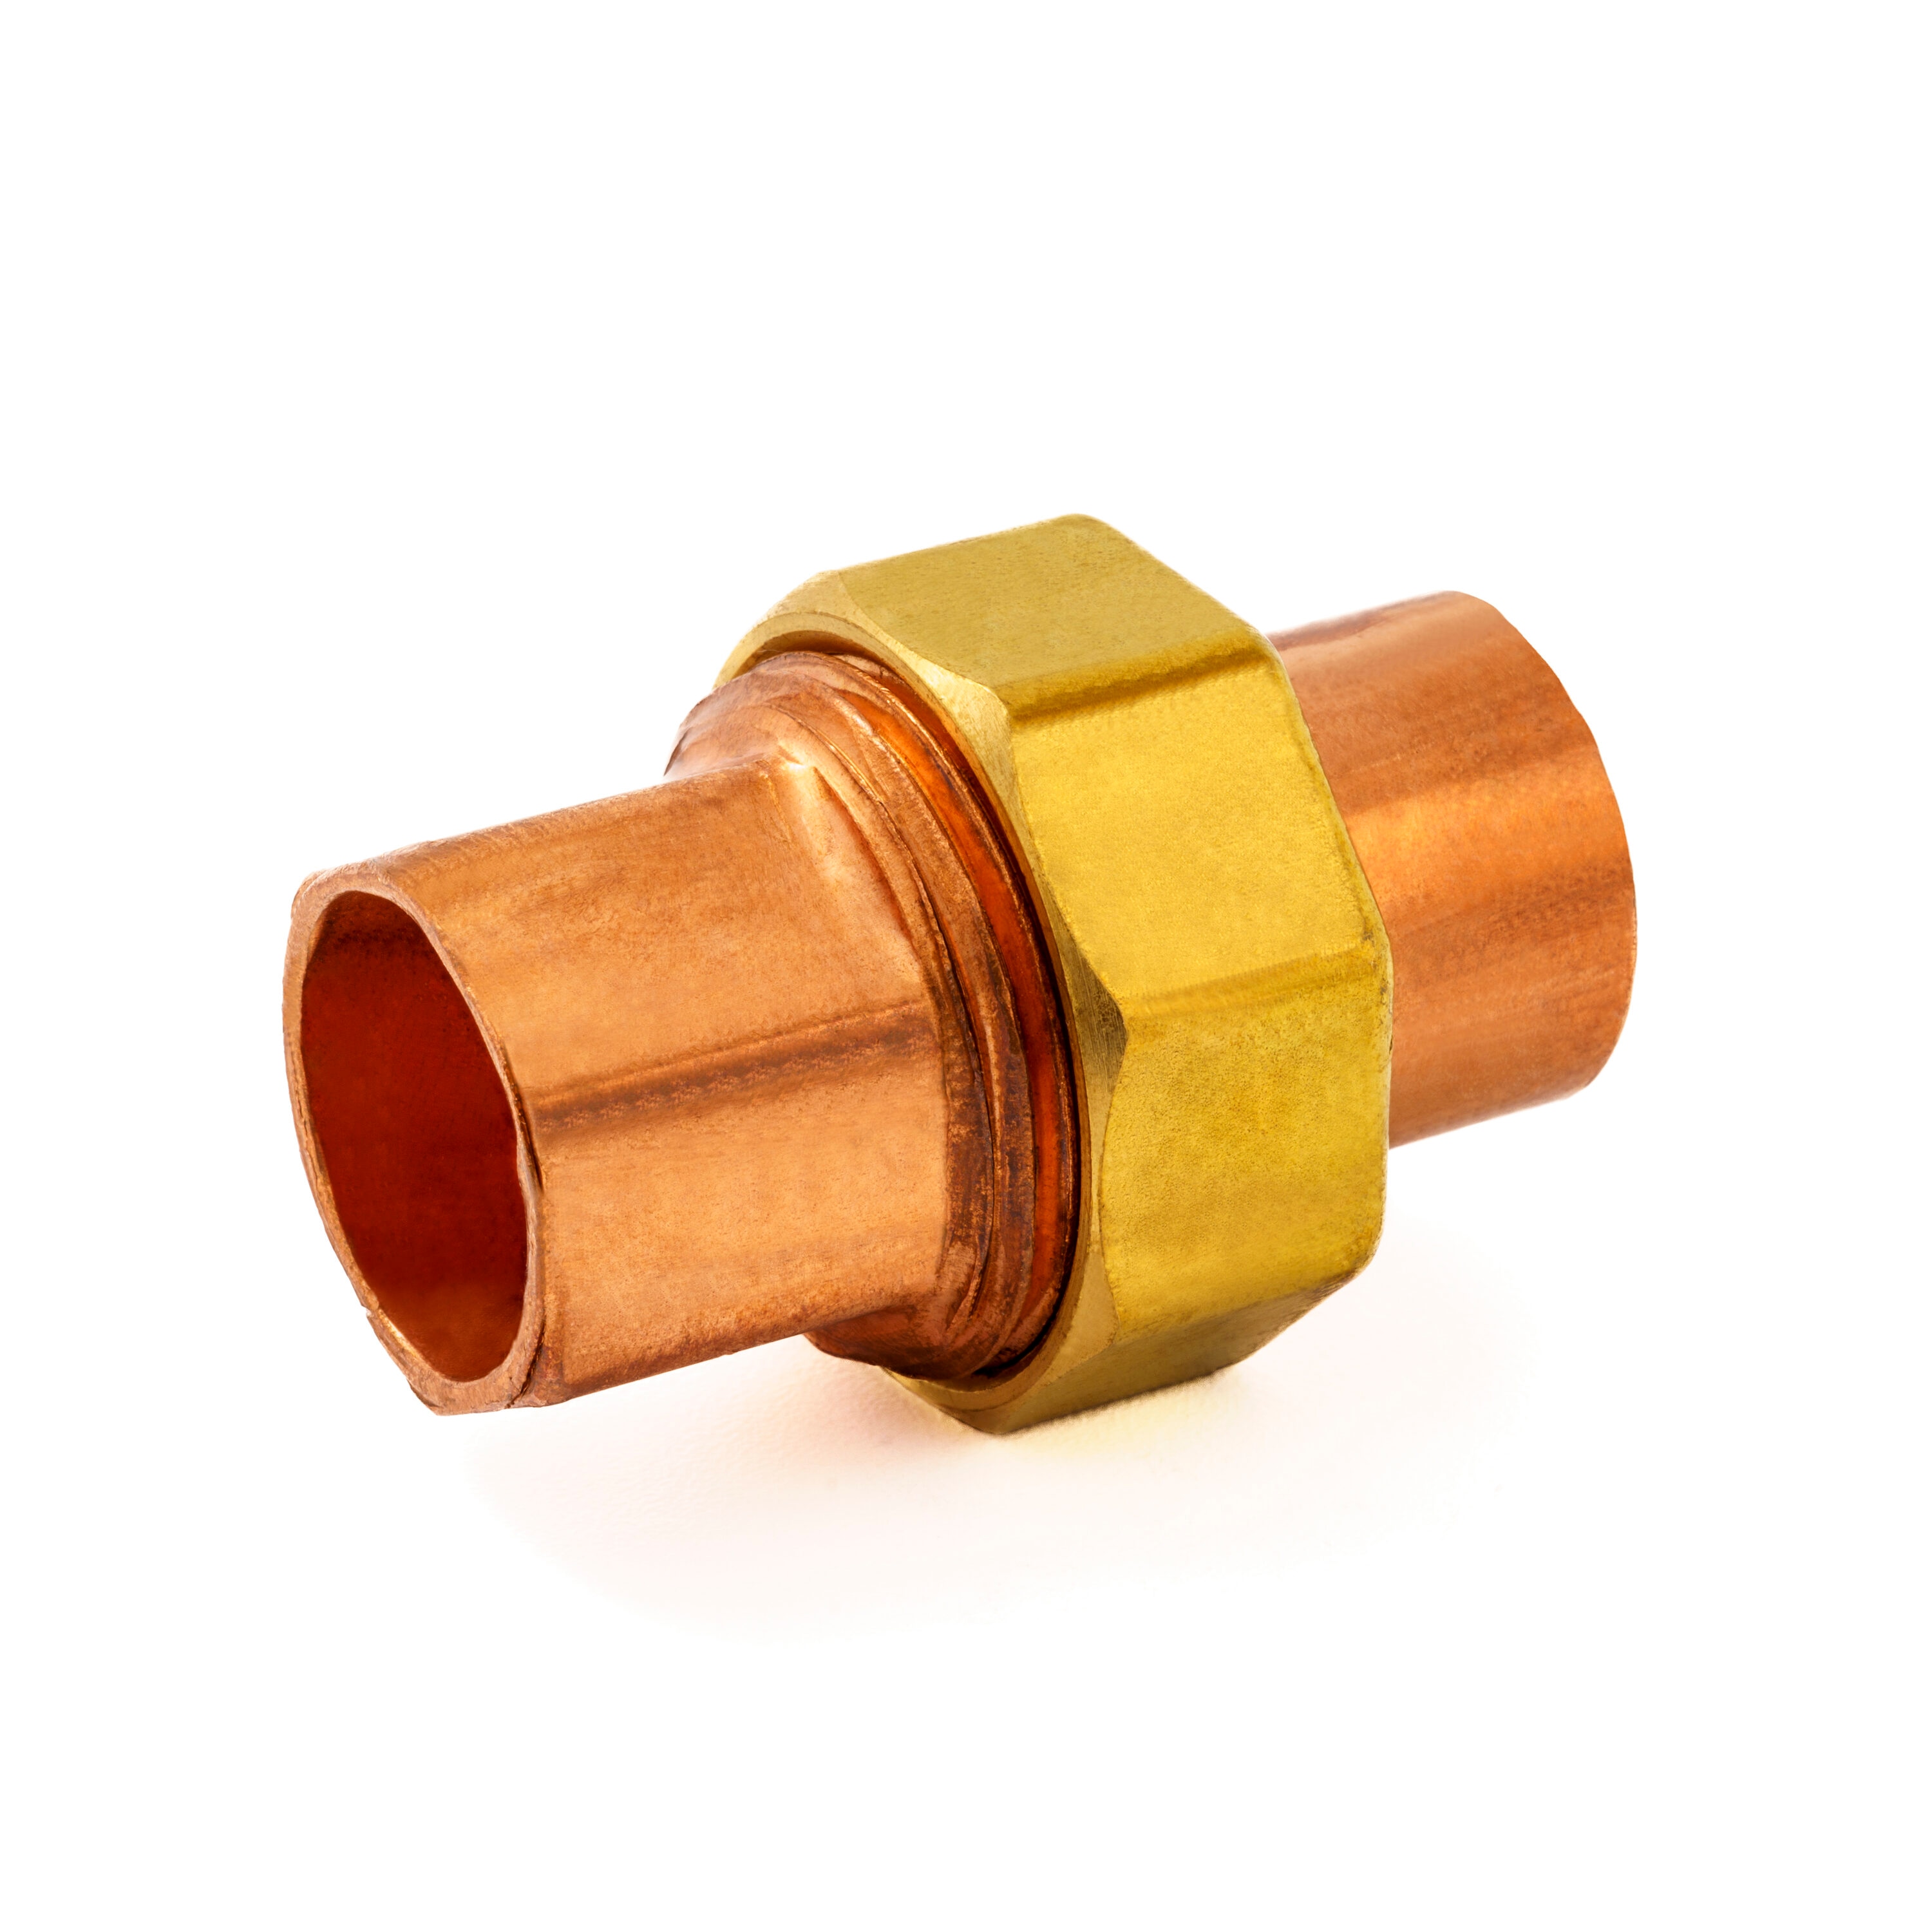 Union Copper Pipe & Fittings at